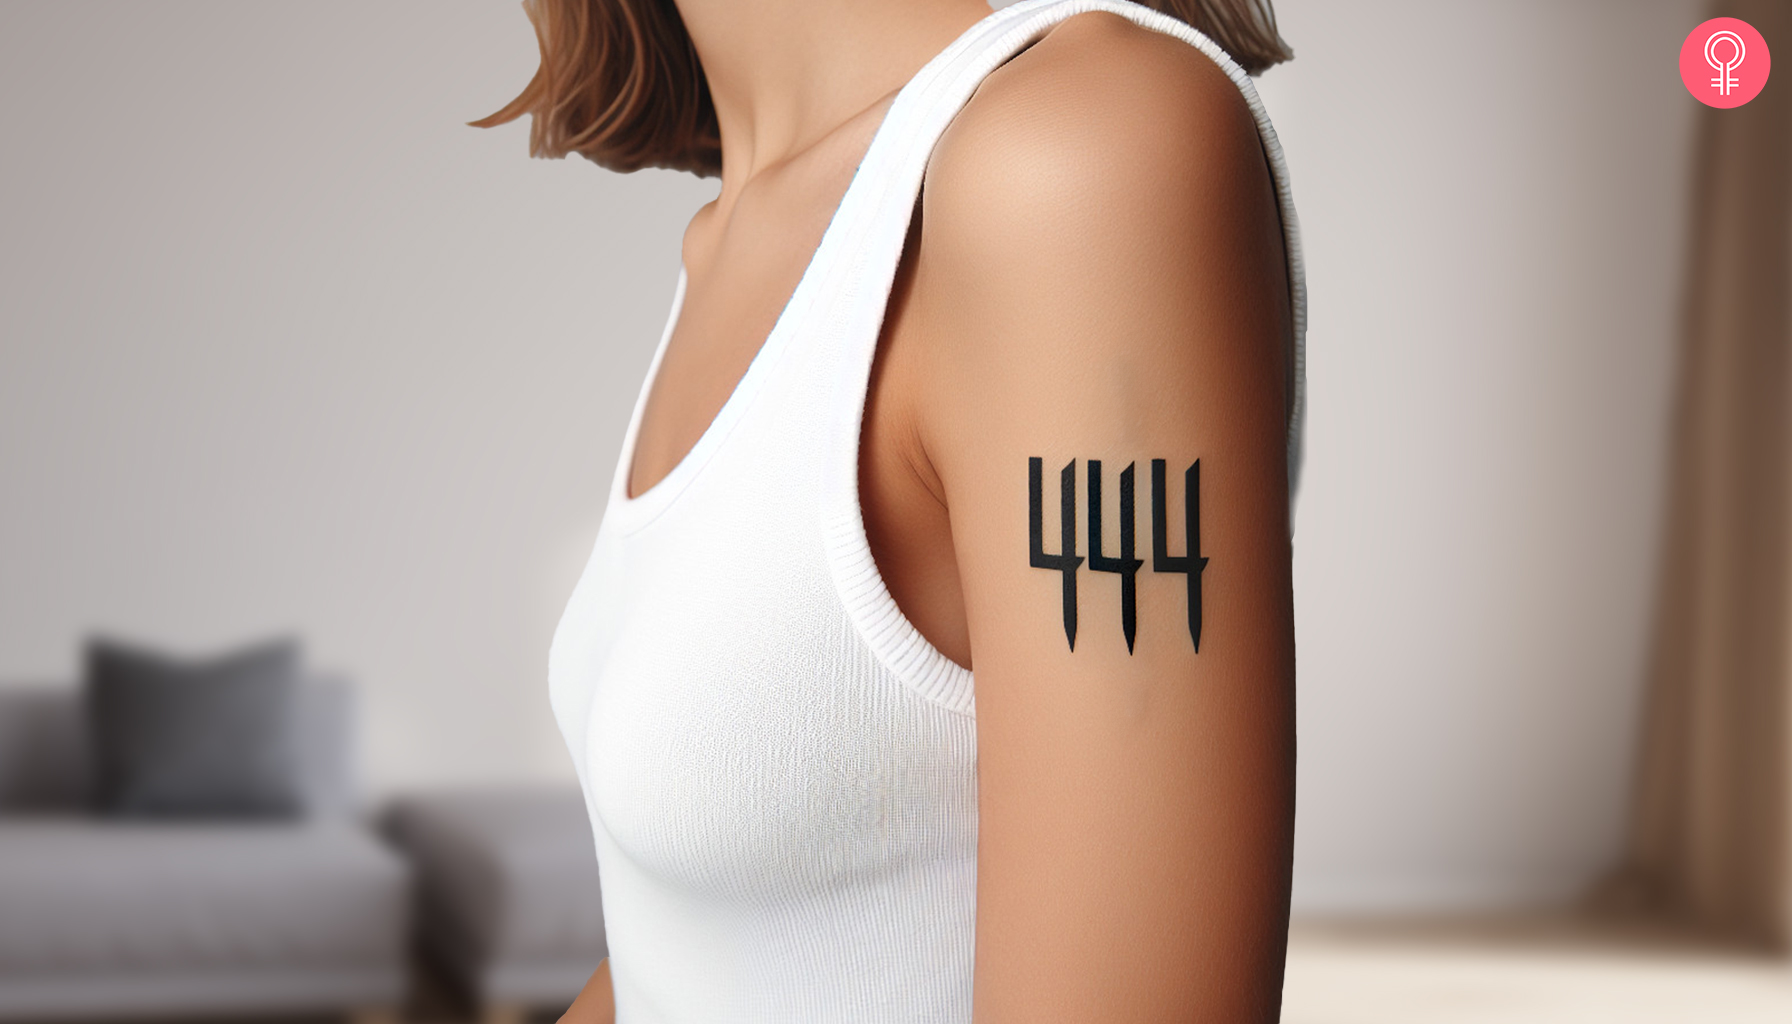 444 angel number tattoo on the arm of a woman